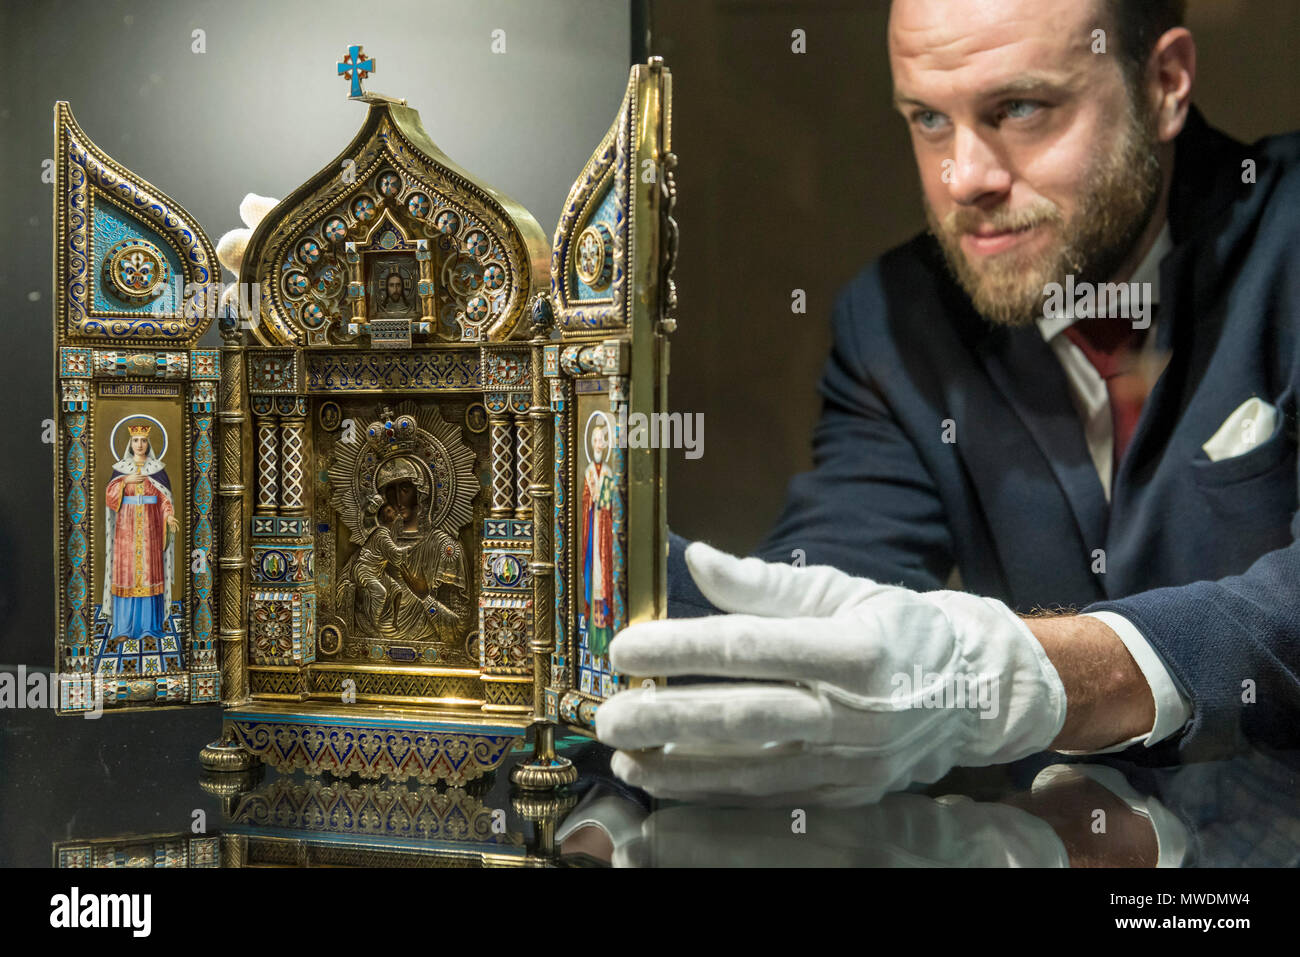 London, UK.  1 June 2018. A Sotheby's technician presents 'An Imperial Silver-Gilt and Enamel Triptych Icon of the Feodorovskaya Mother of God', 1894, by Savelev Brothers (Est. GBP80-120k) at a preview of the Russian Pictures and Russian Works of Art, Fabergé & Icons sale which will take place at Sotheby's, New Bond Street on 5 June.  Credit: Stephen Chung / Alamy Live News Stock Photo